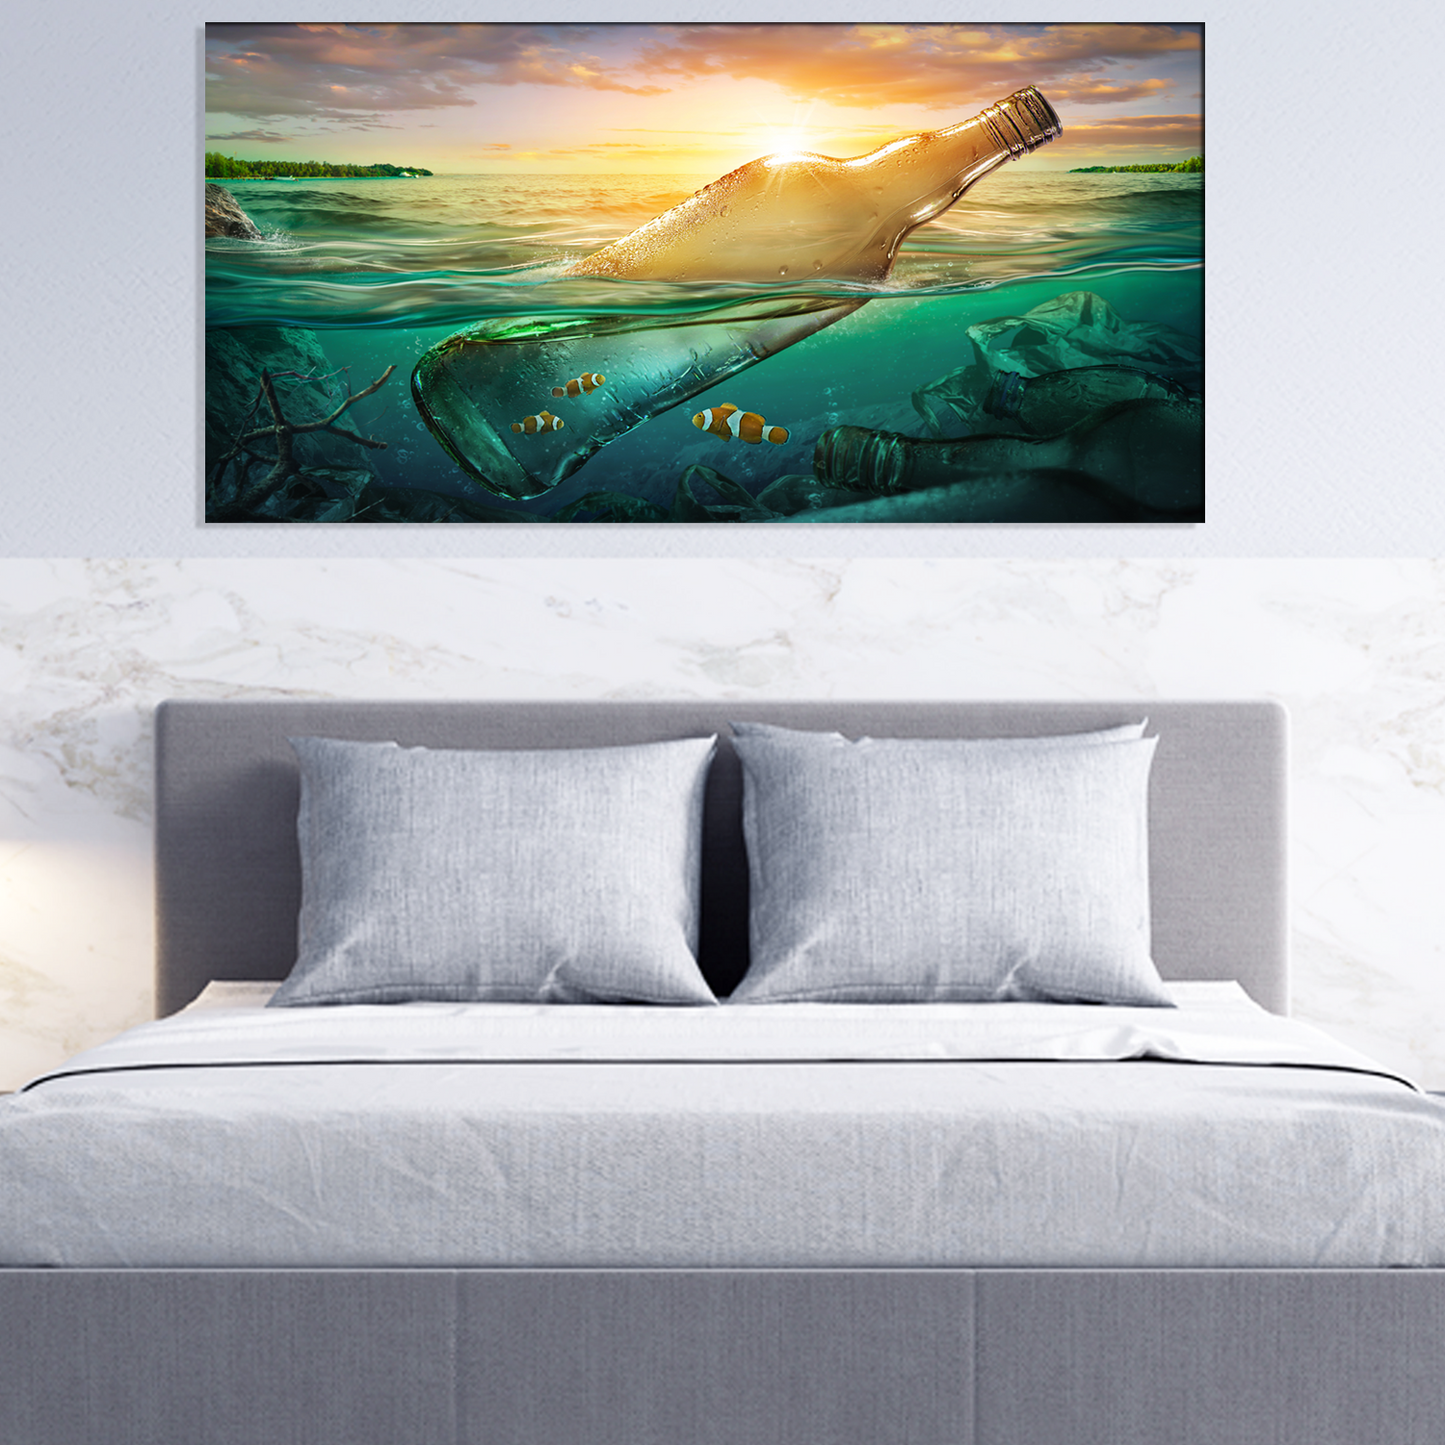 Bottle and Sunset Painting Canvas Wall Painting